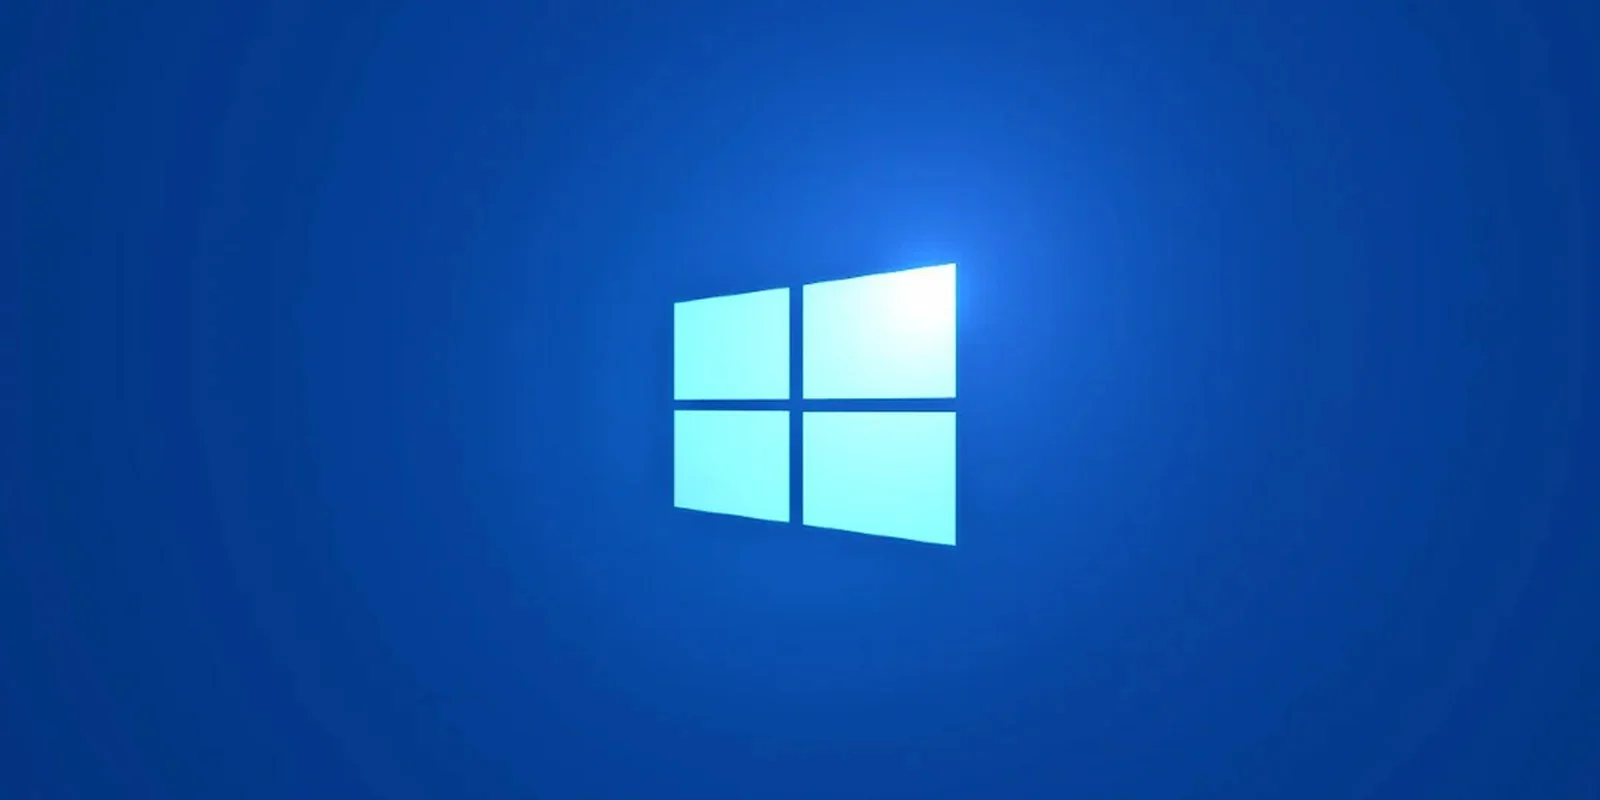 How Would You Like to Reinstall Windows?